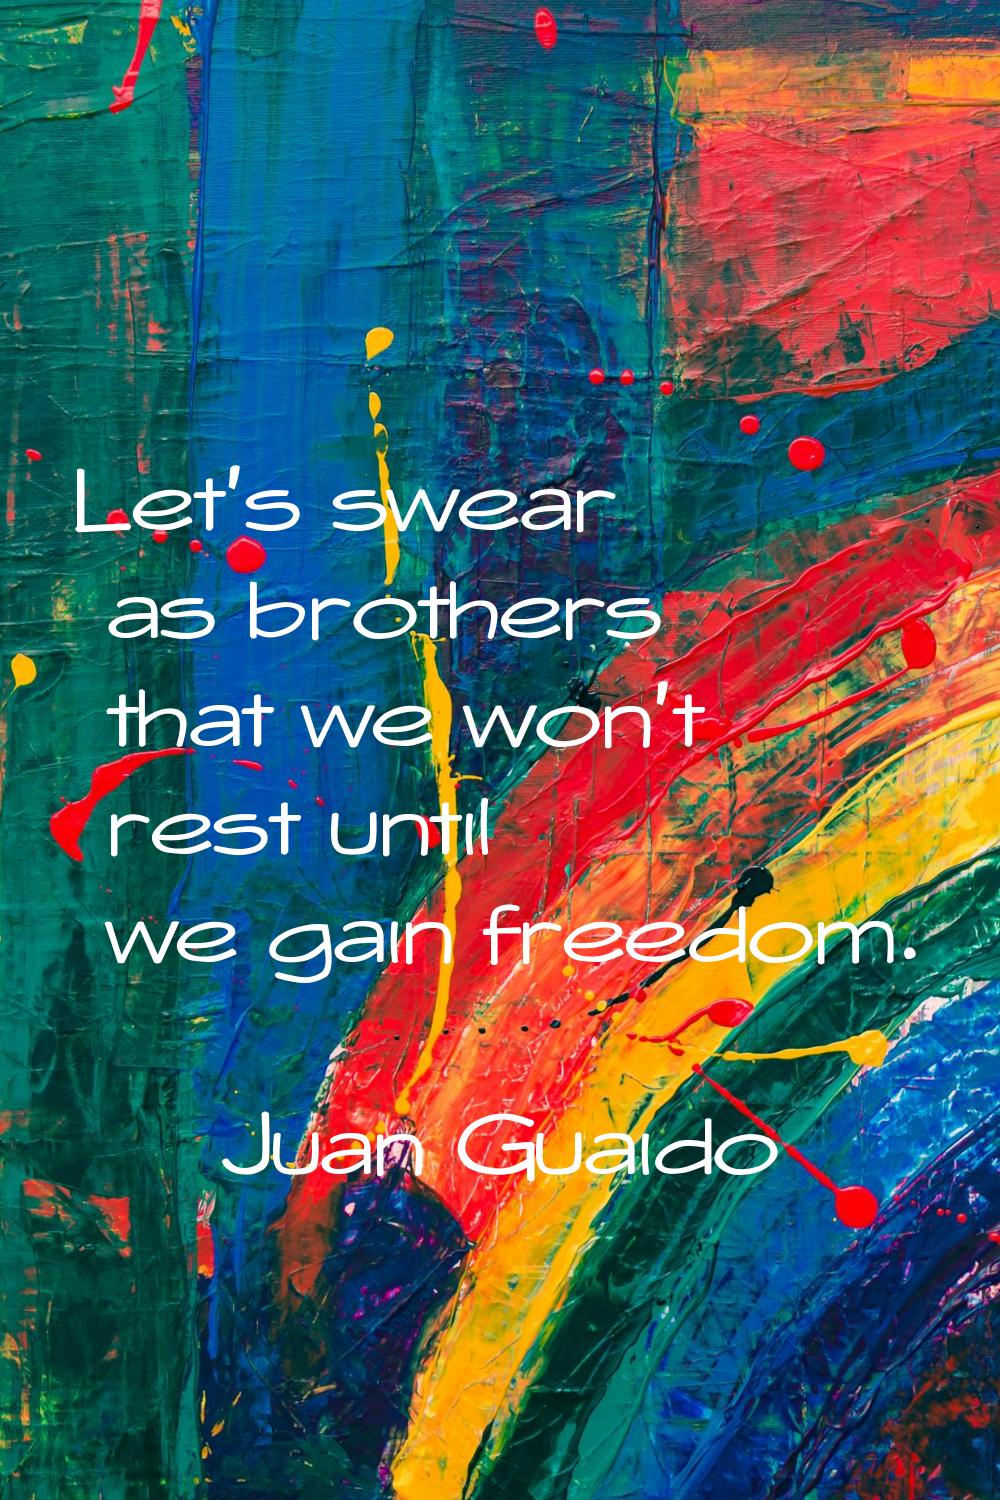 Let's swear as brothers that we won't rest until we gain freedom.